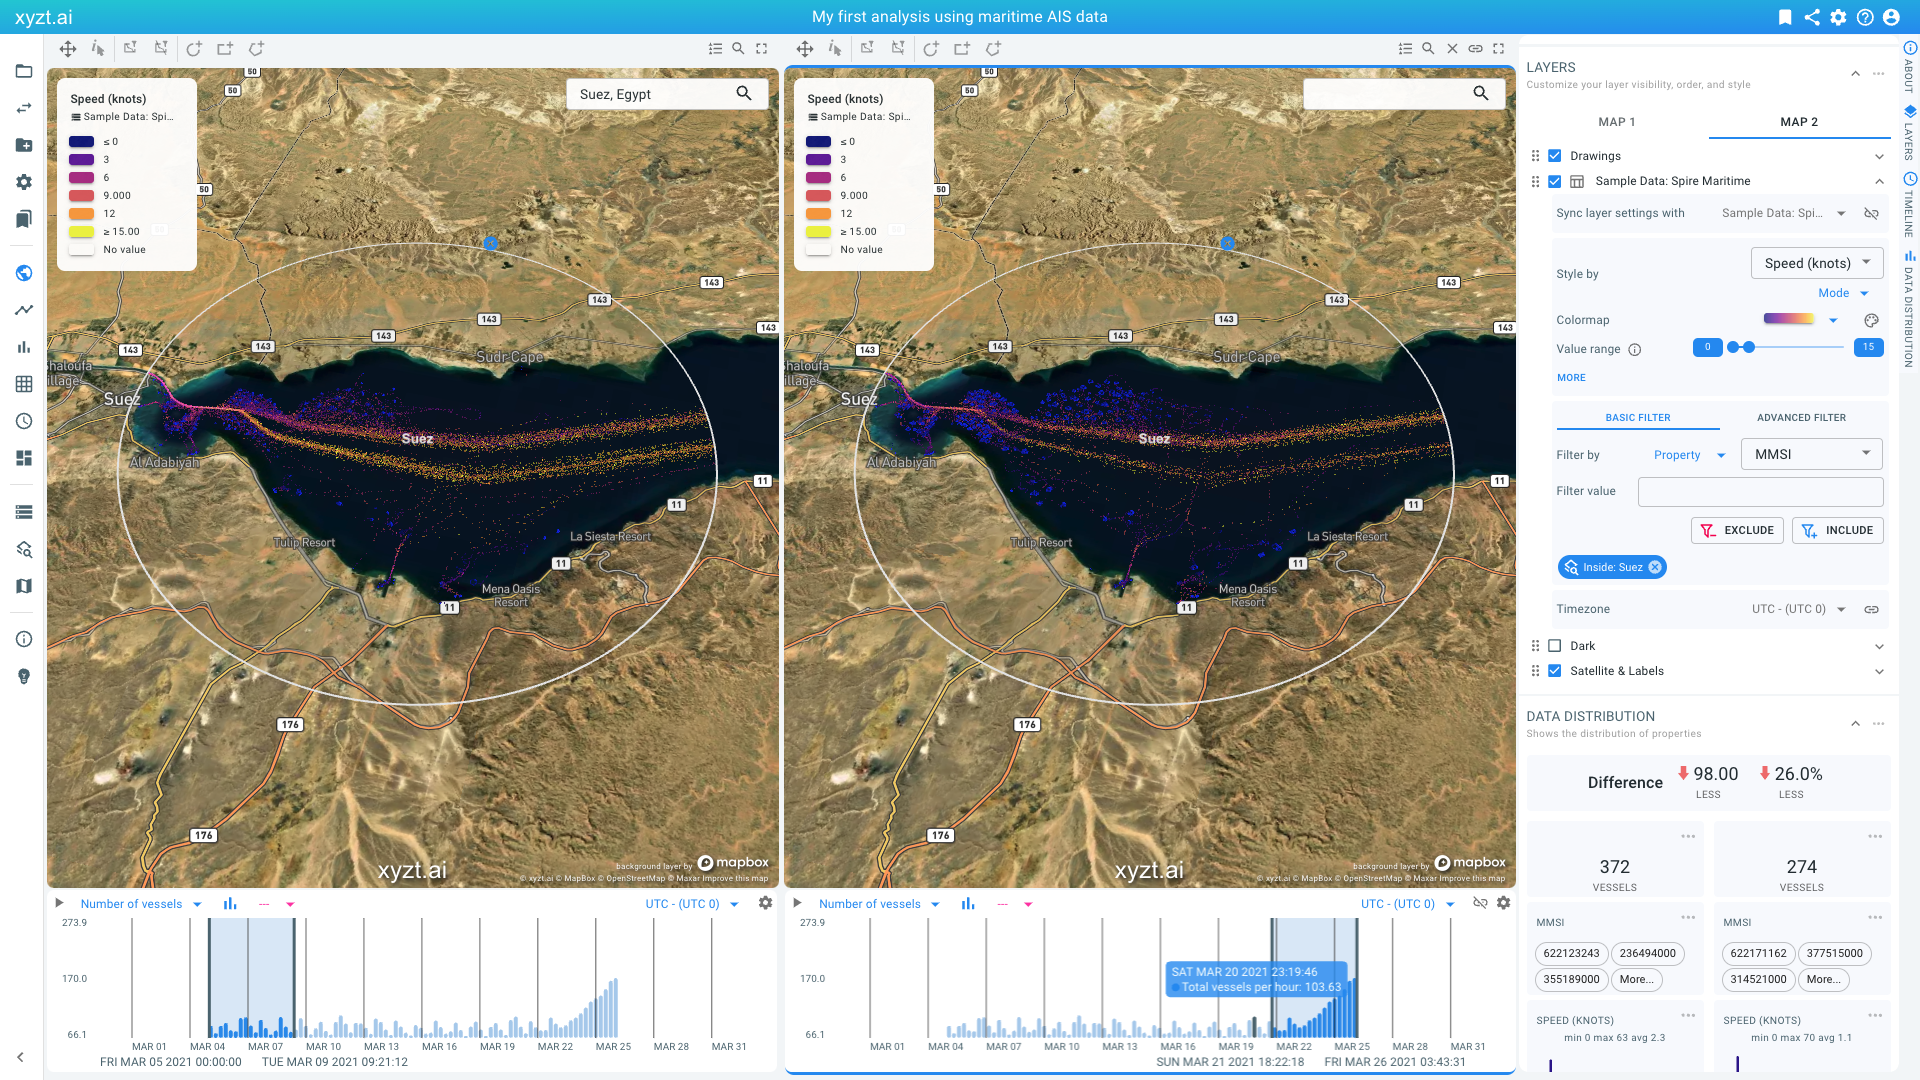 Split view analysis enables looking at different regions and periods